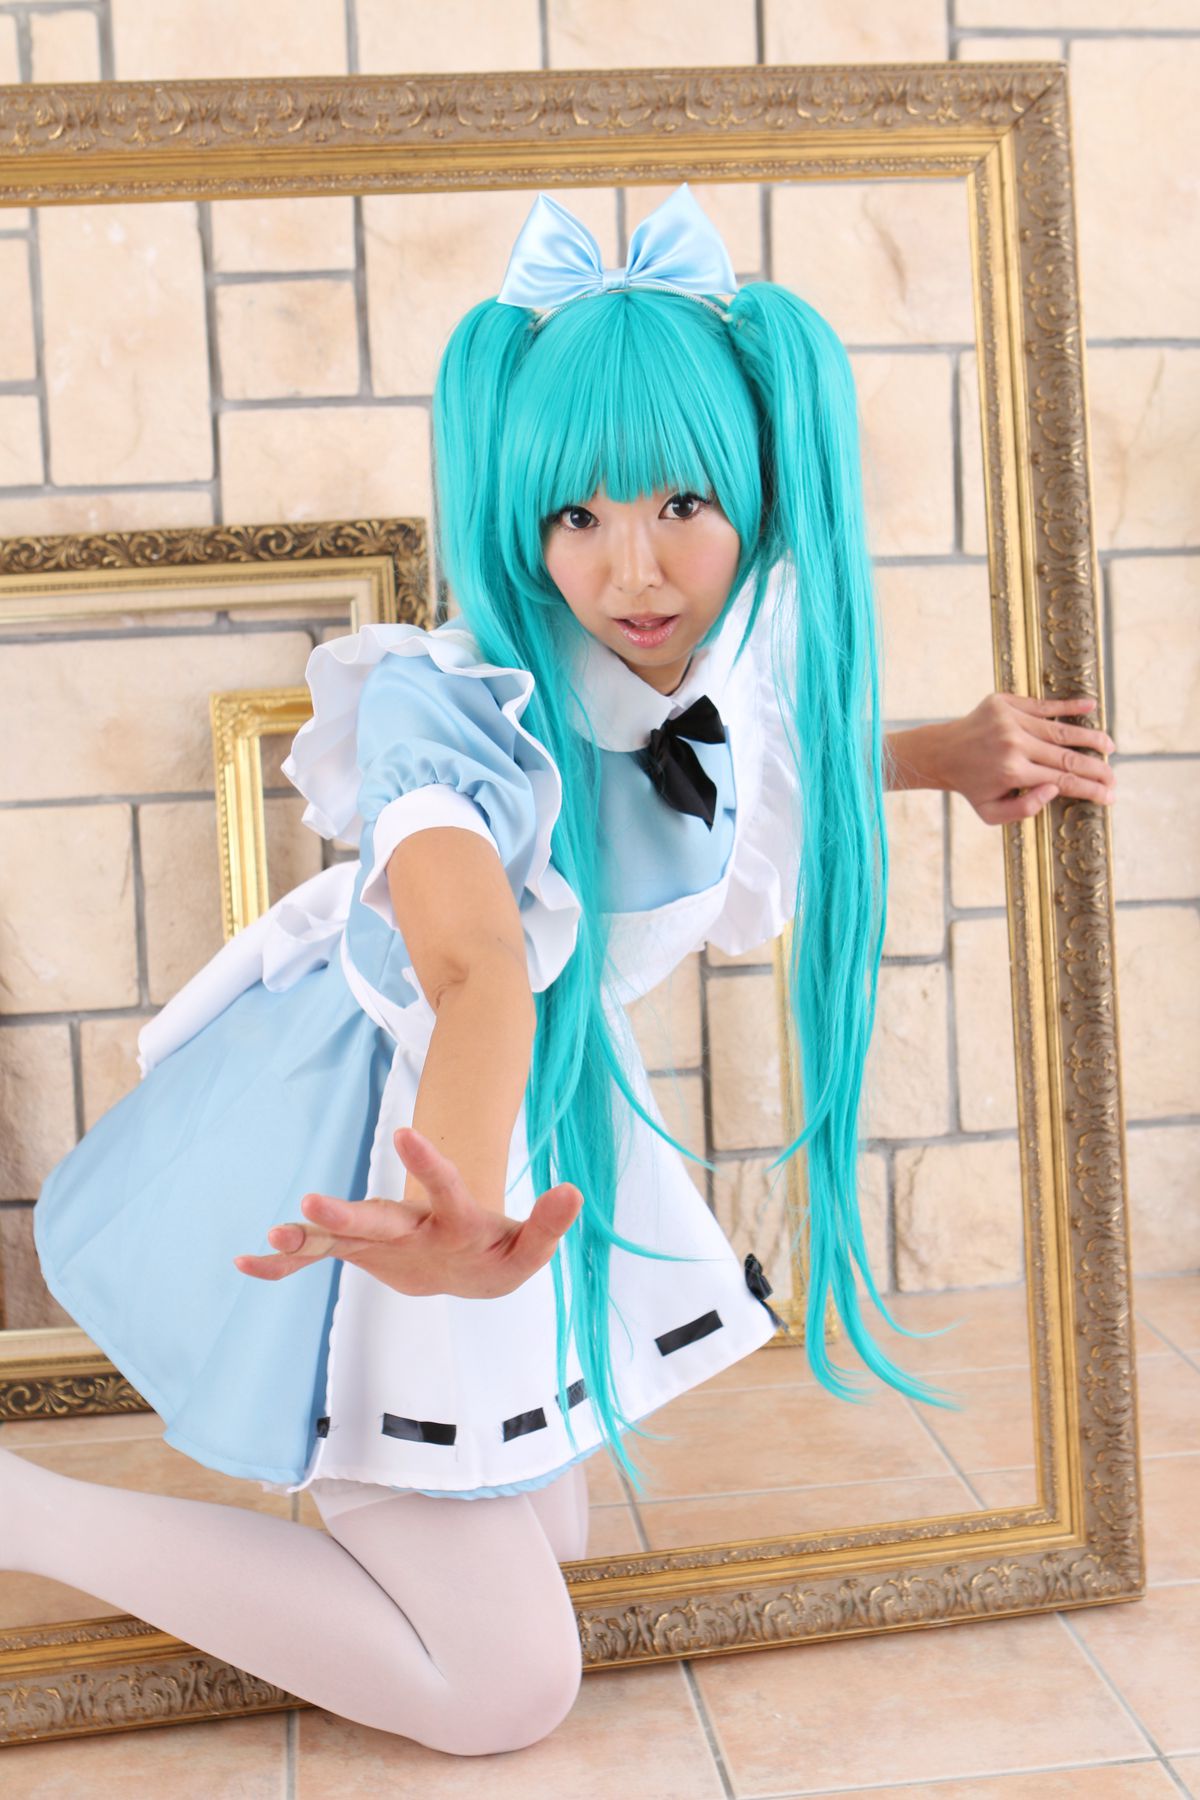 taotuhome[Cosplay套图] New Hatsune Miku from Vocaloid - So Sexy第82张